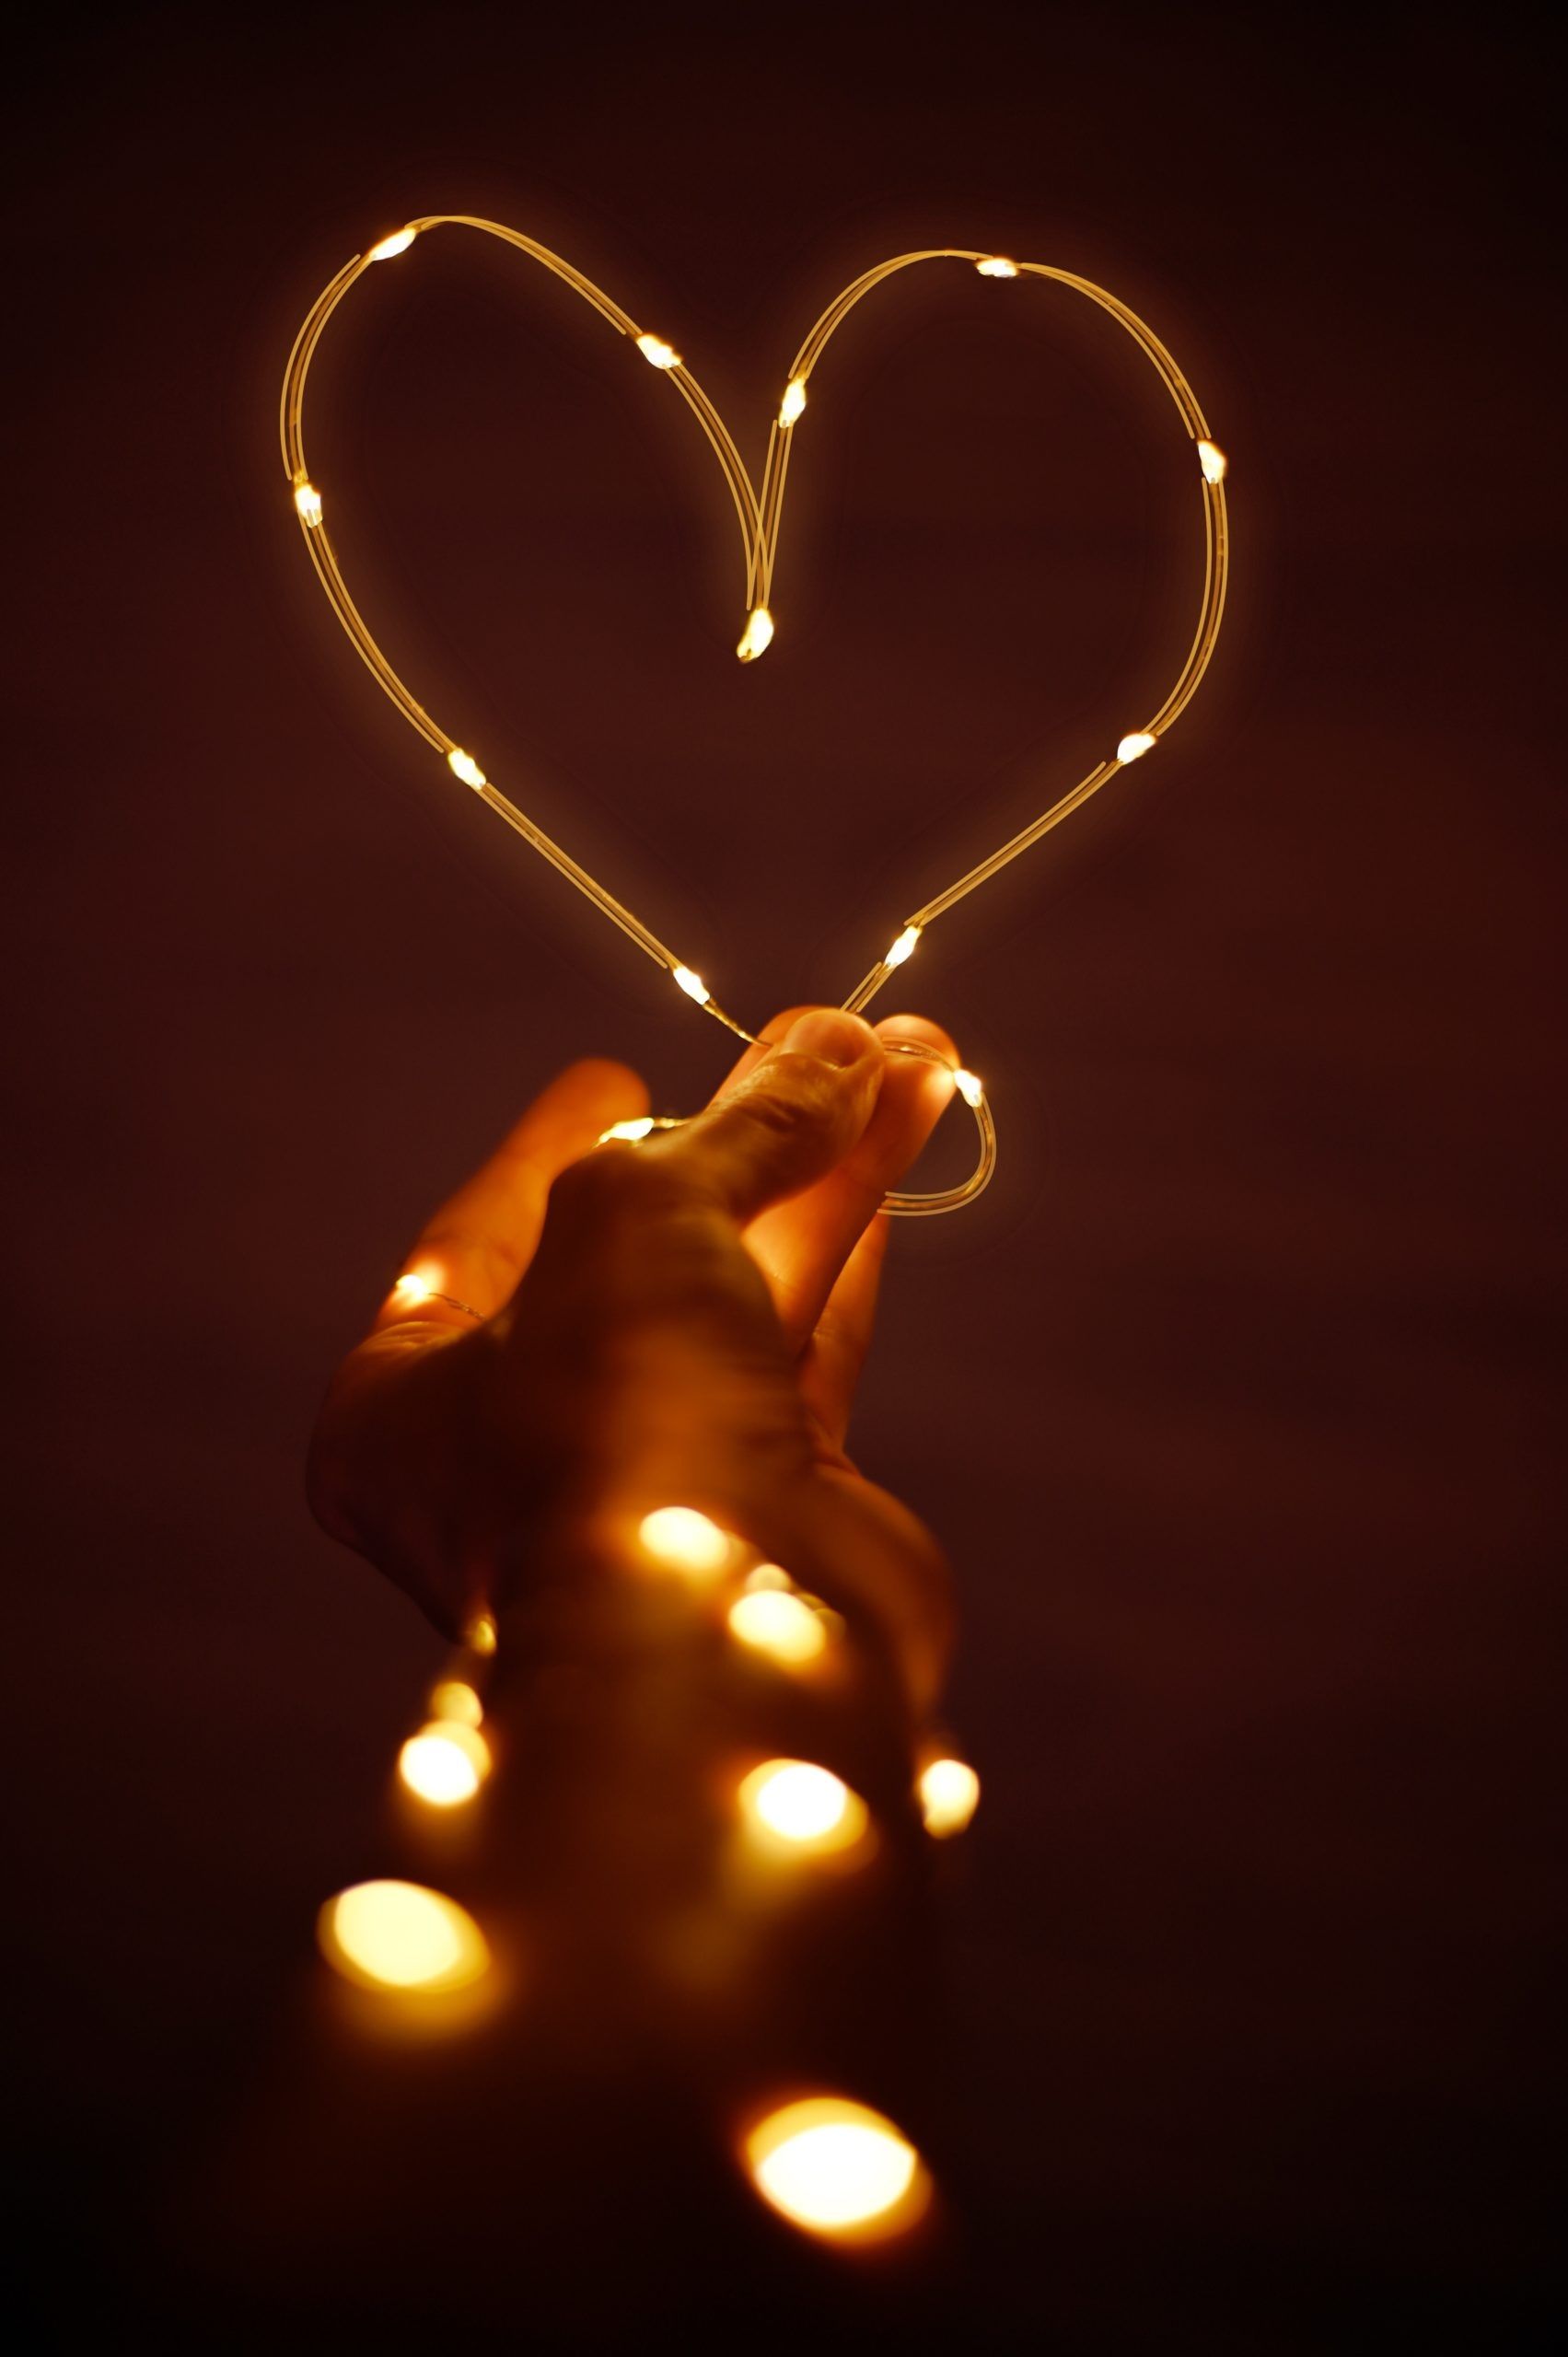 A heart made out of lights in a persons hand - Heart